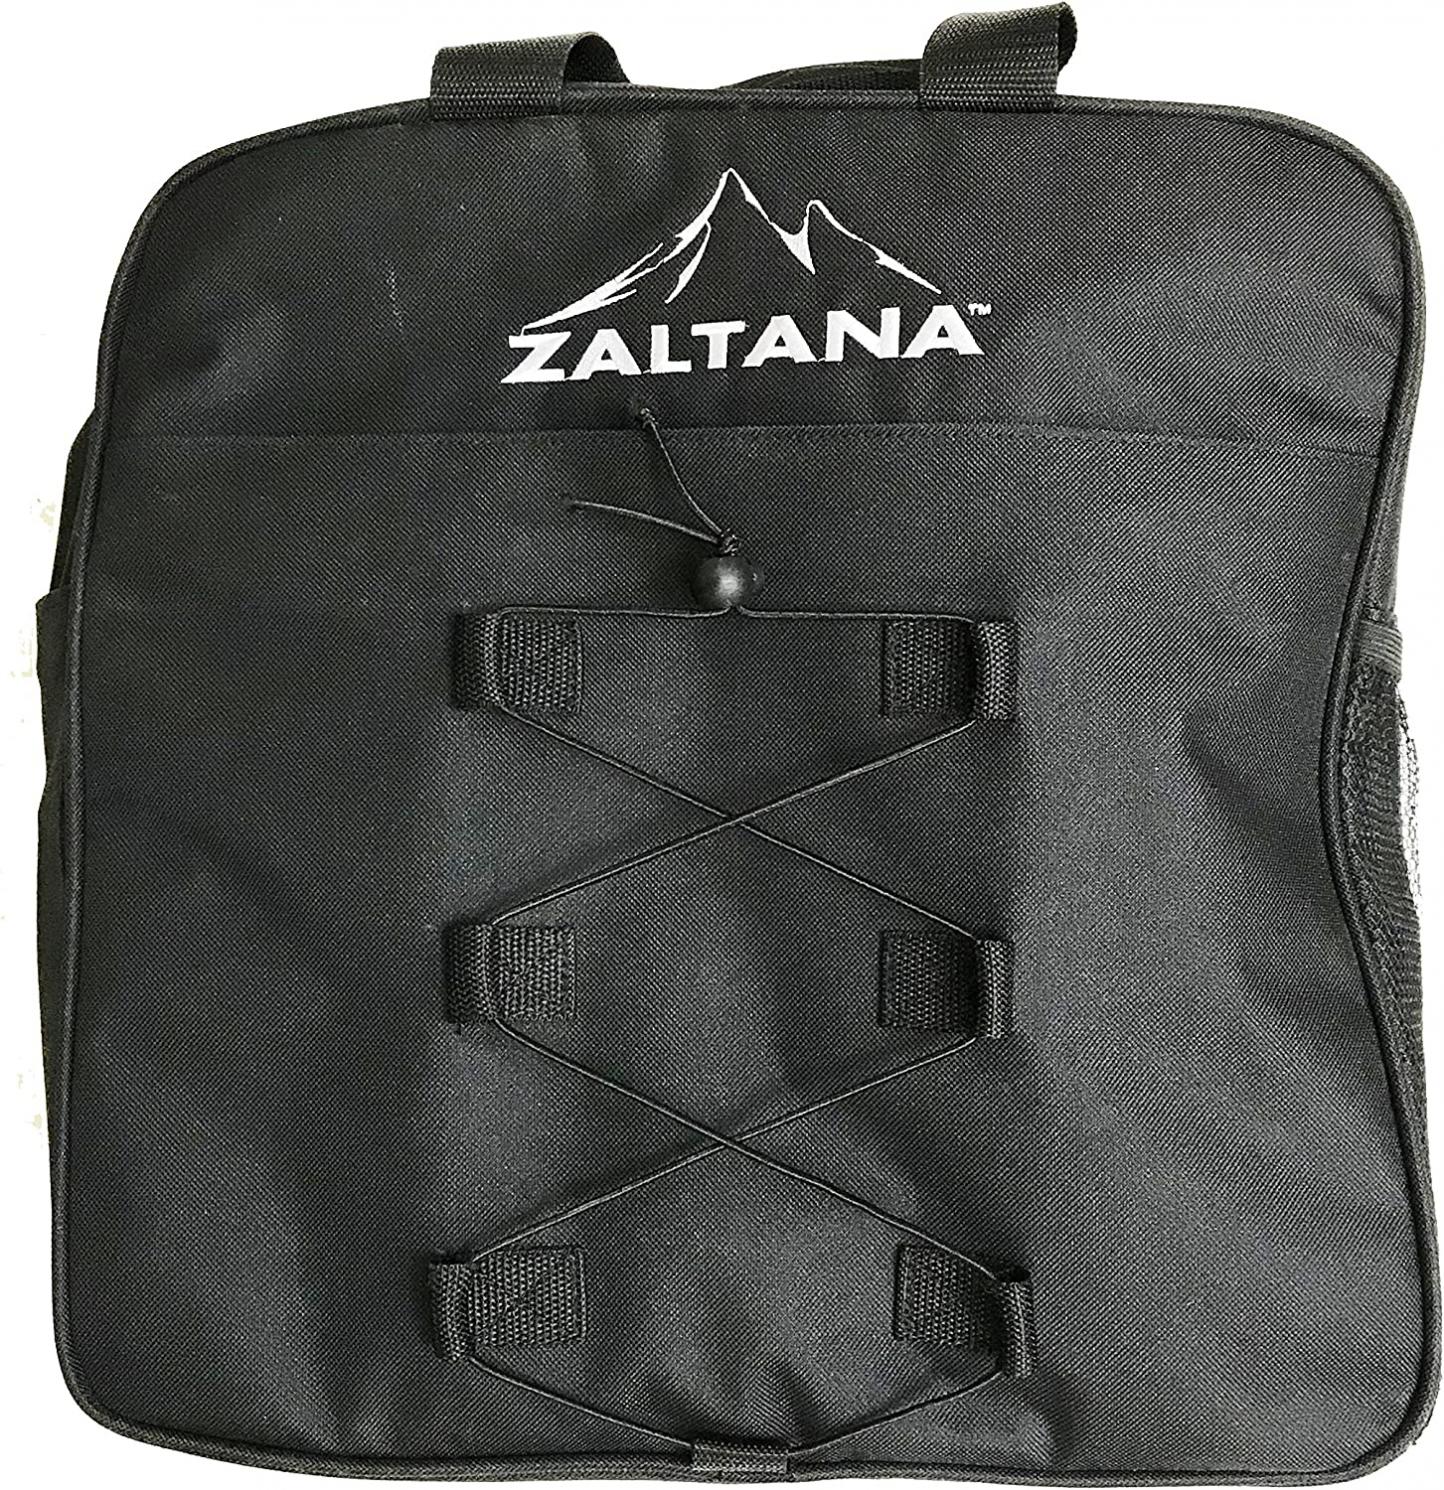 Zaltana Padded Ski Boot Bag Backpack – Skiing and Snowboarding Travel Luggage – Stores Gear Including Jacket, Helmet, Goggles, Gloves & Accessories SKB30